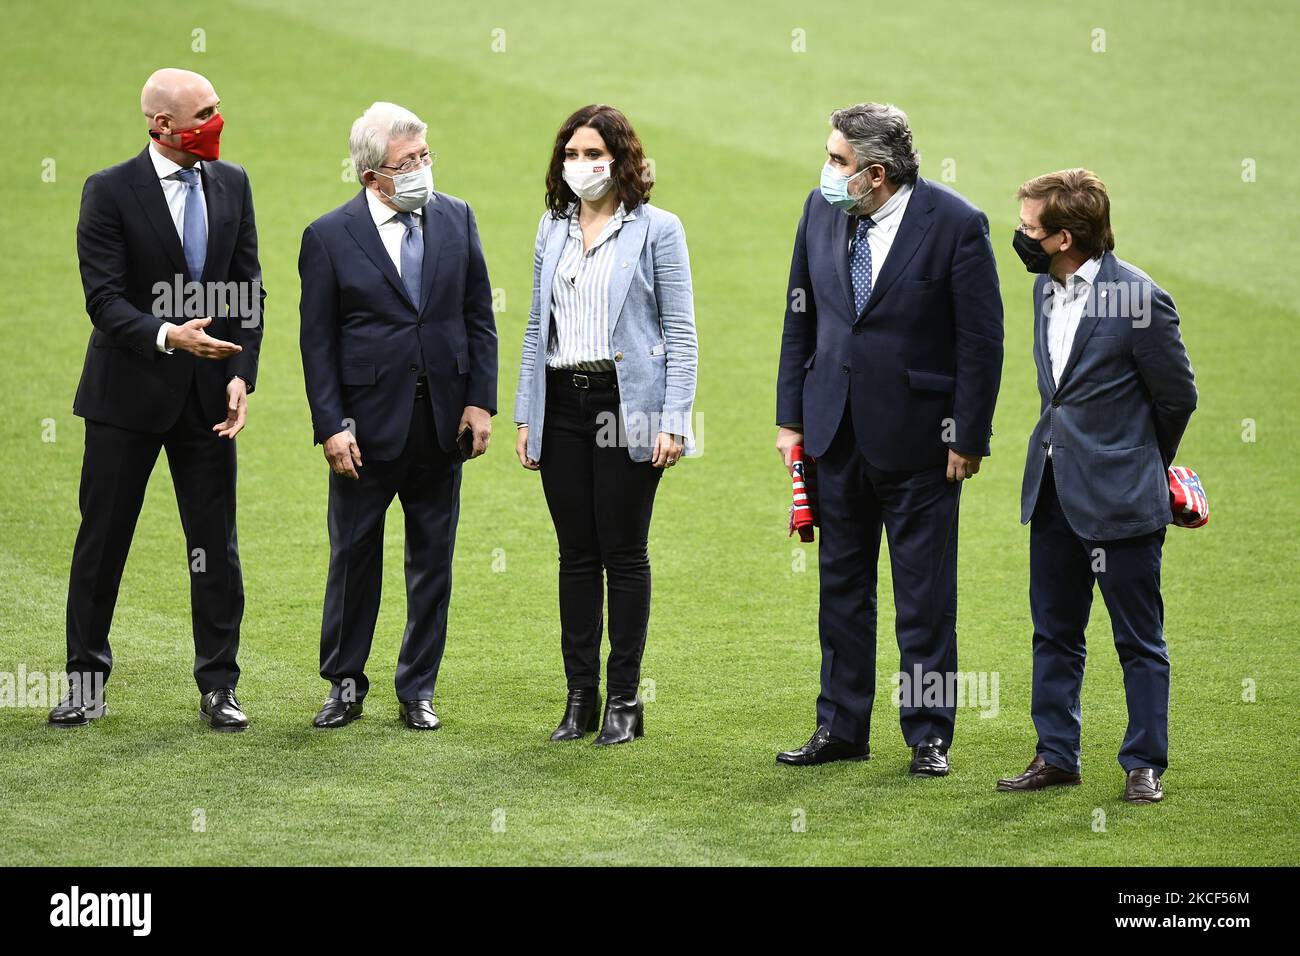 (L-R) Luis Rubiales, Enrique Cerezo, President of the Community of Madrid Isabel Diaz Ayuso, the Minister of Culture and Sports Jose Manuel Rodriguez Uribes, the Mayor Jose Luis Martinez-Almeida during the presentation ceremony of the La Liga 20/21 championship trophy at Estadio Wanda Metropolitano on May 23, 2021 in Madrid, Spain. (Photo by Jose Breton/Pics Action/NurPhoto) Stock Photo